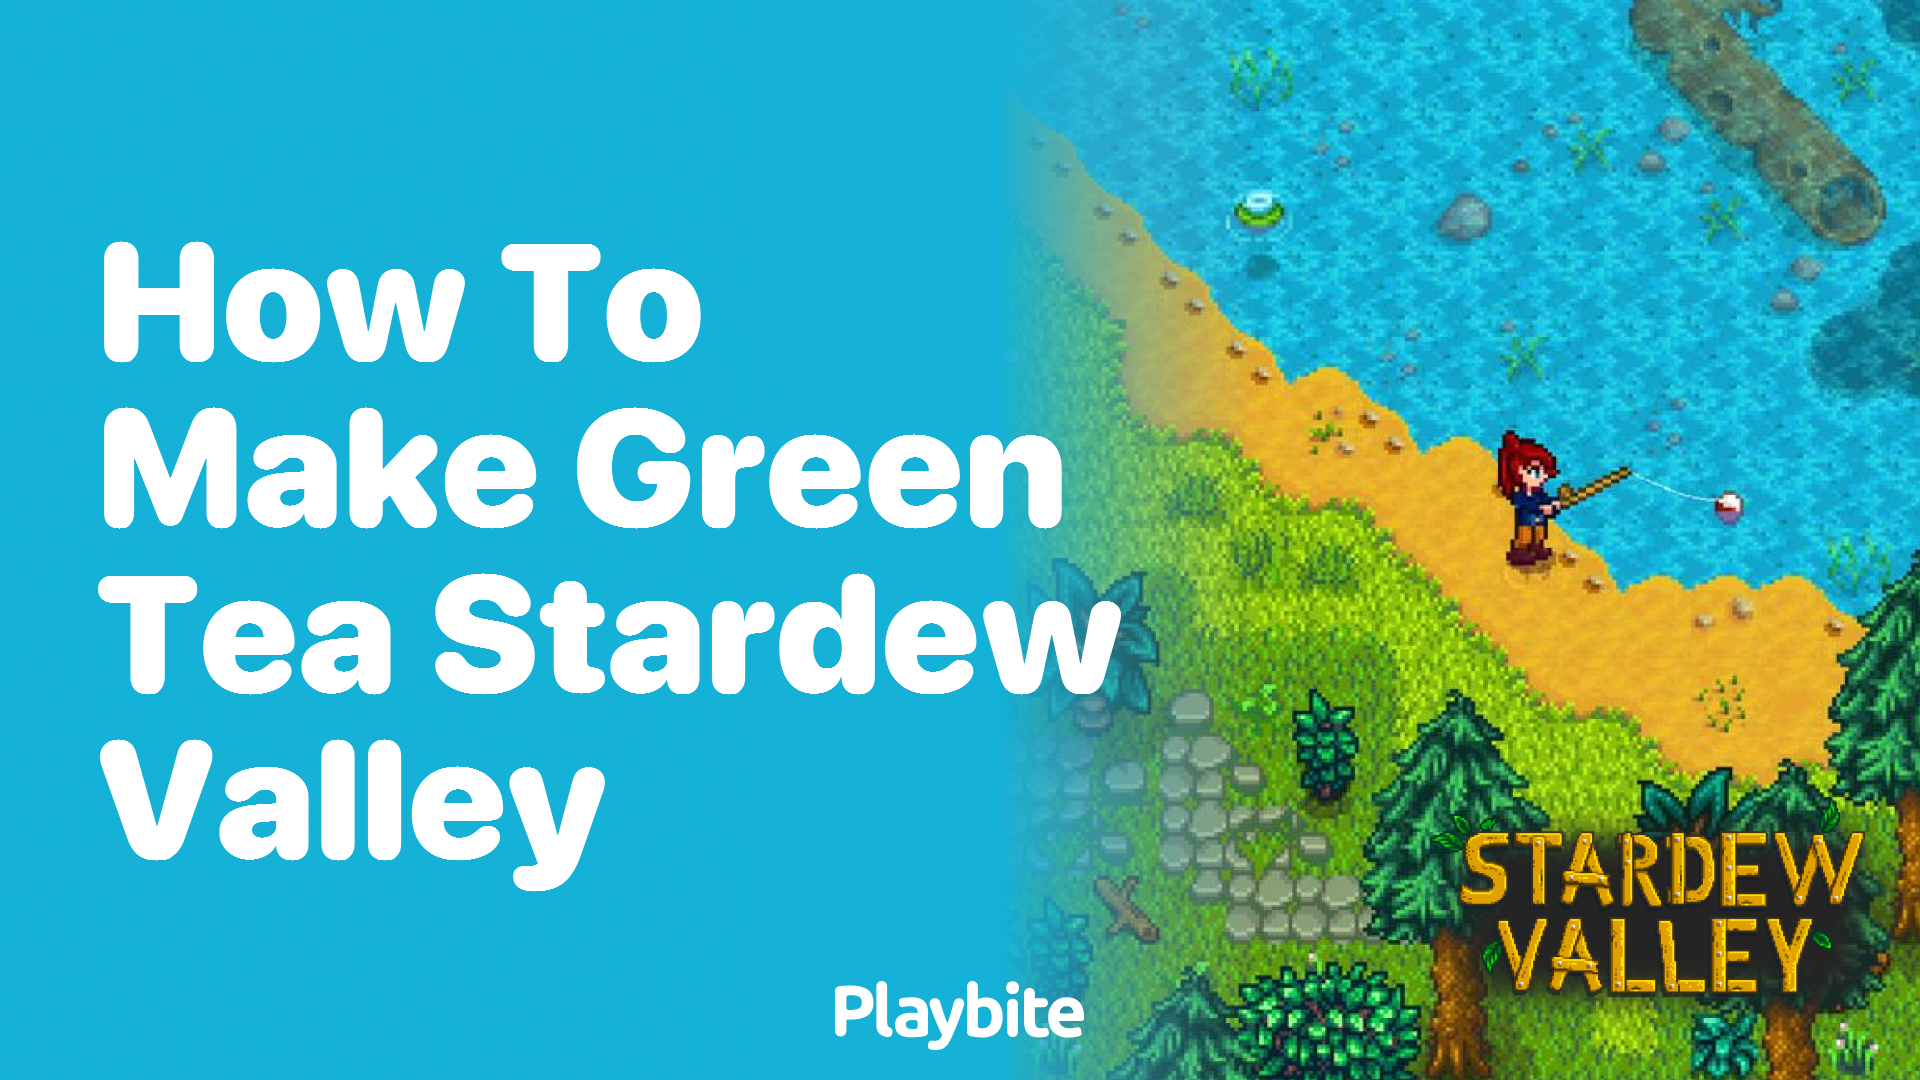 How to Make Green Tea in Stardew Valley